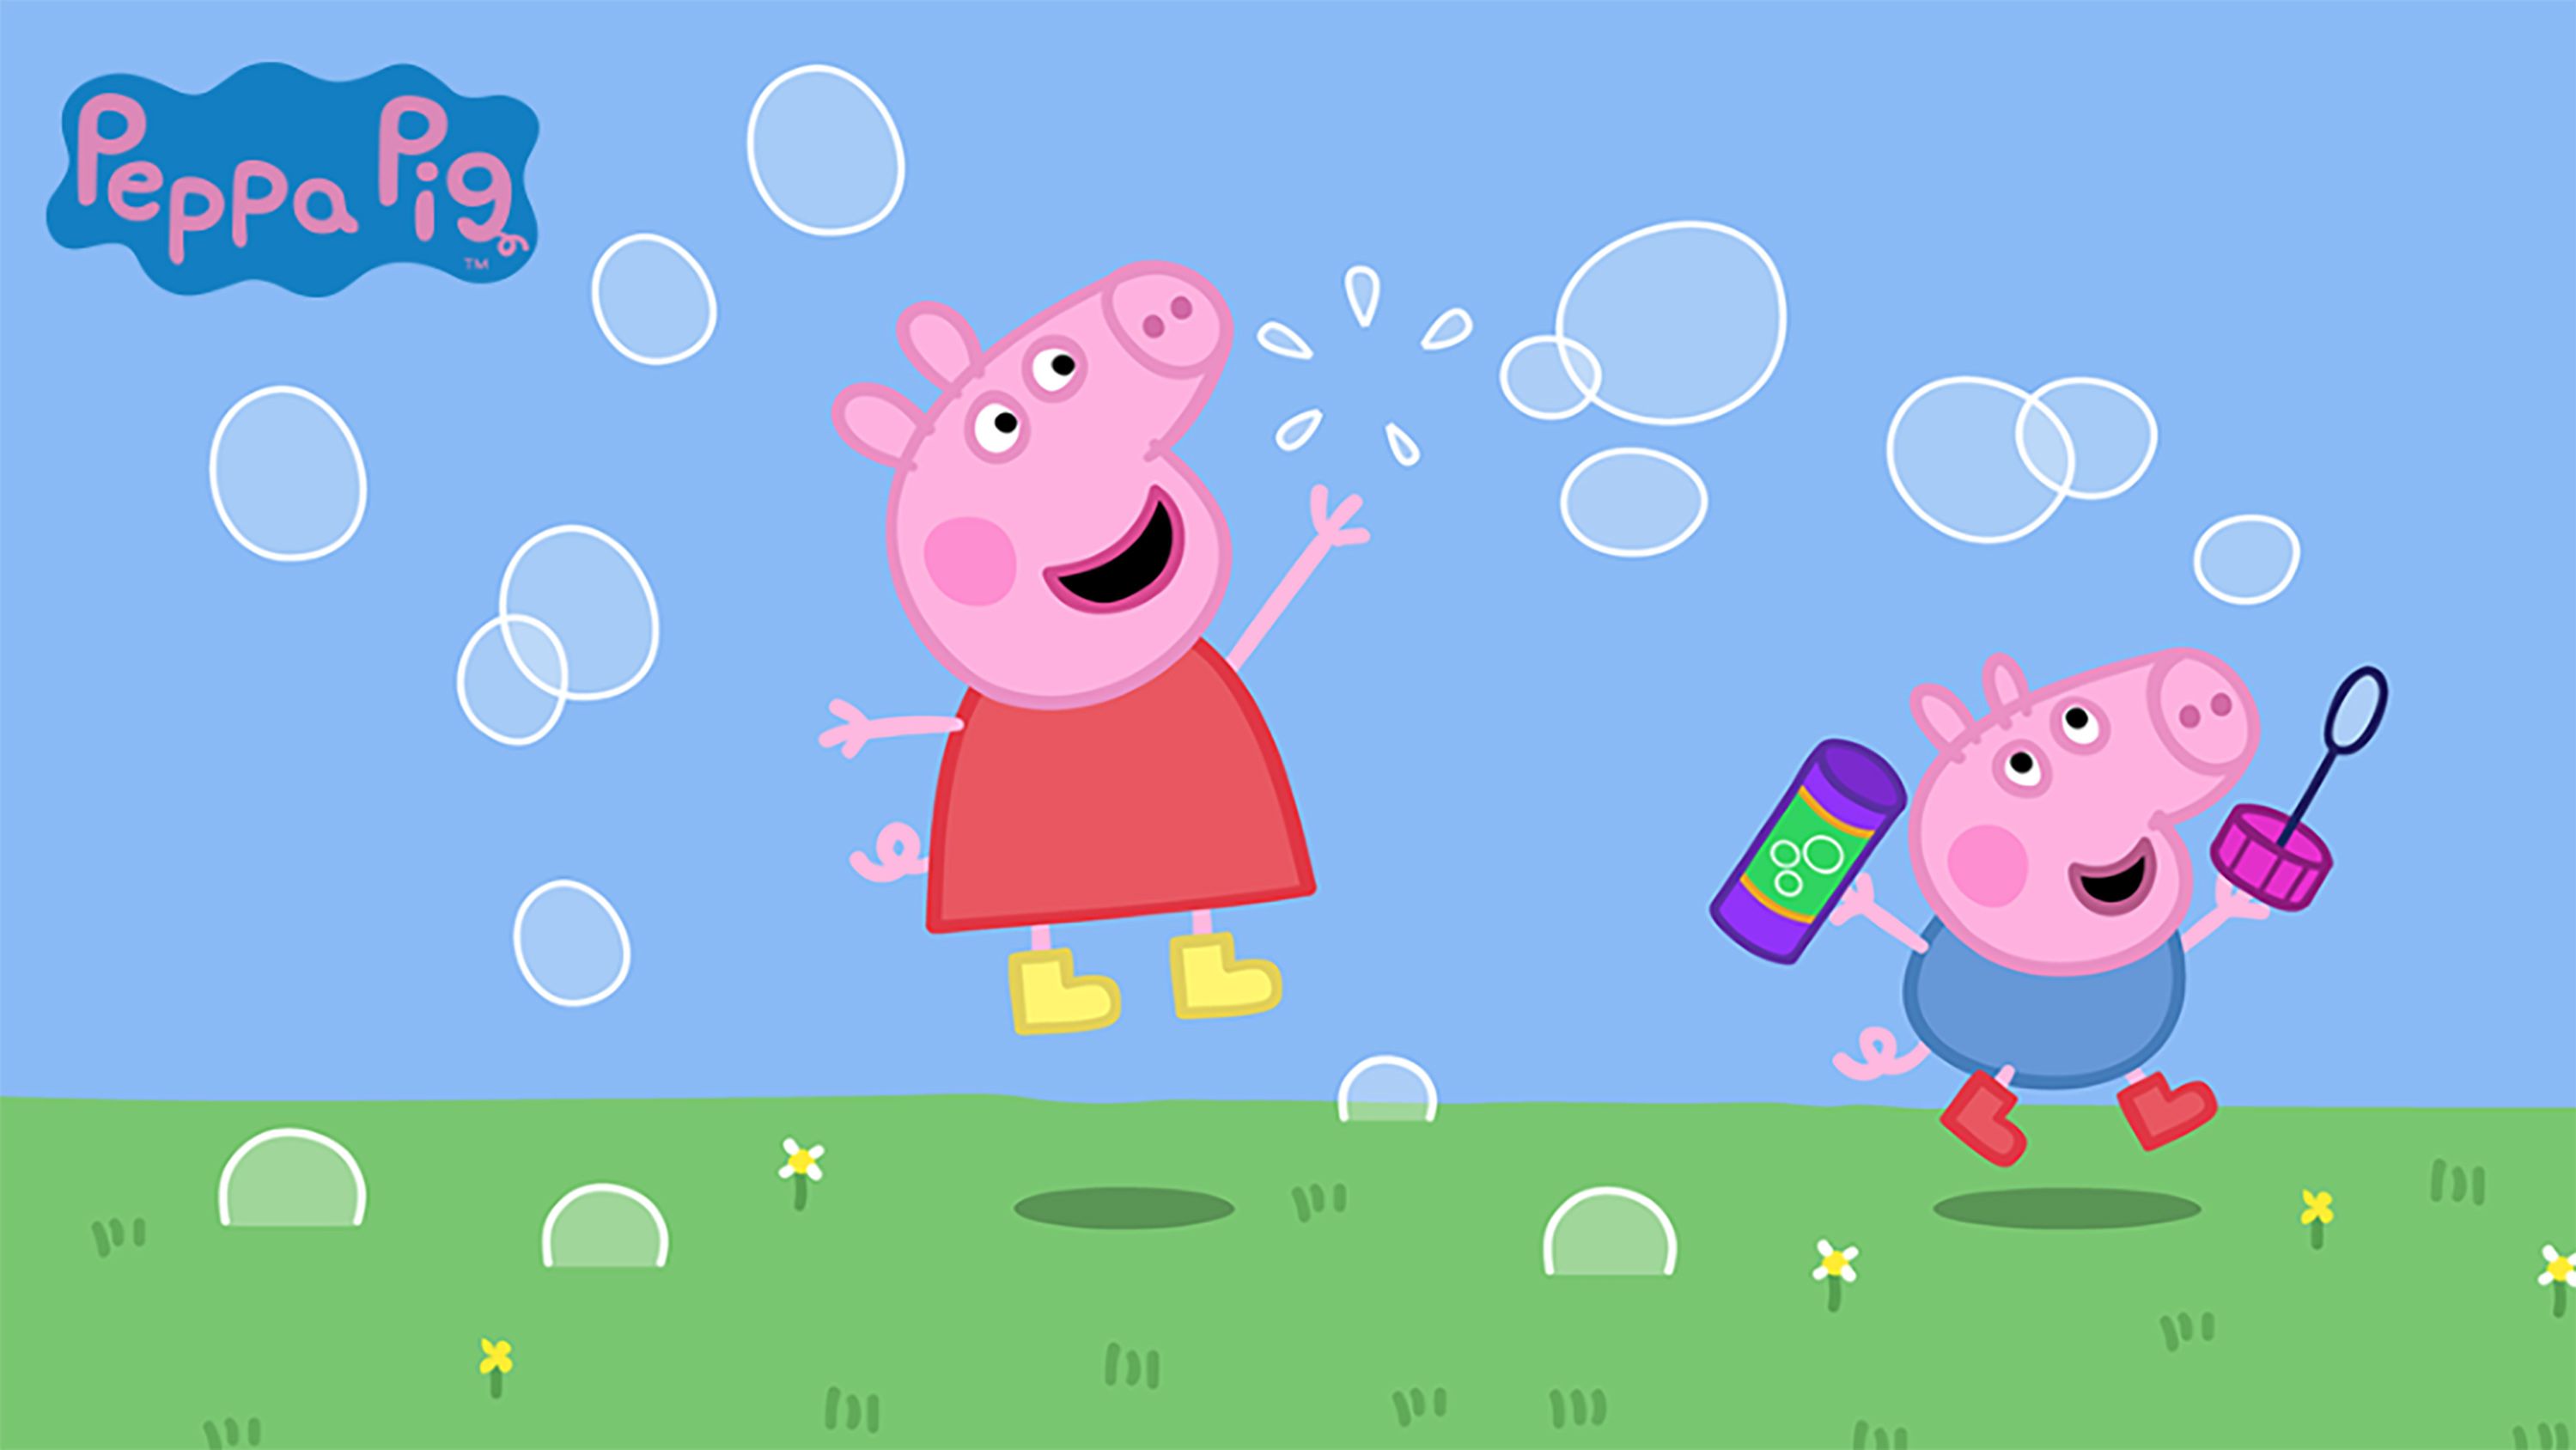 The cartoon star of the children's program "Peppa Pig" has been the subject of memes for years. 